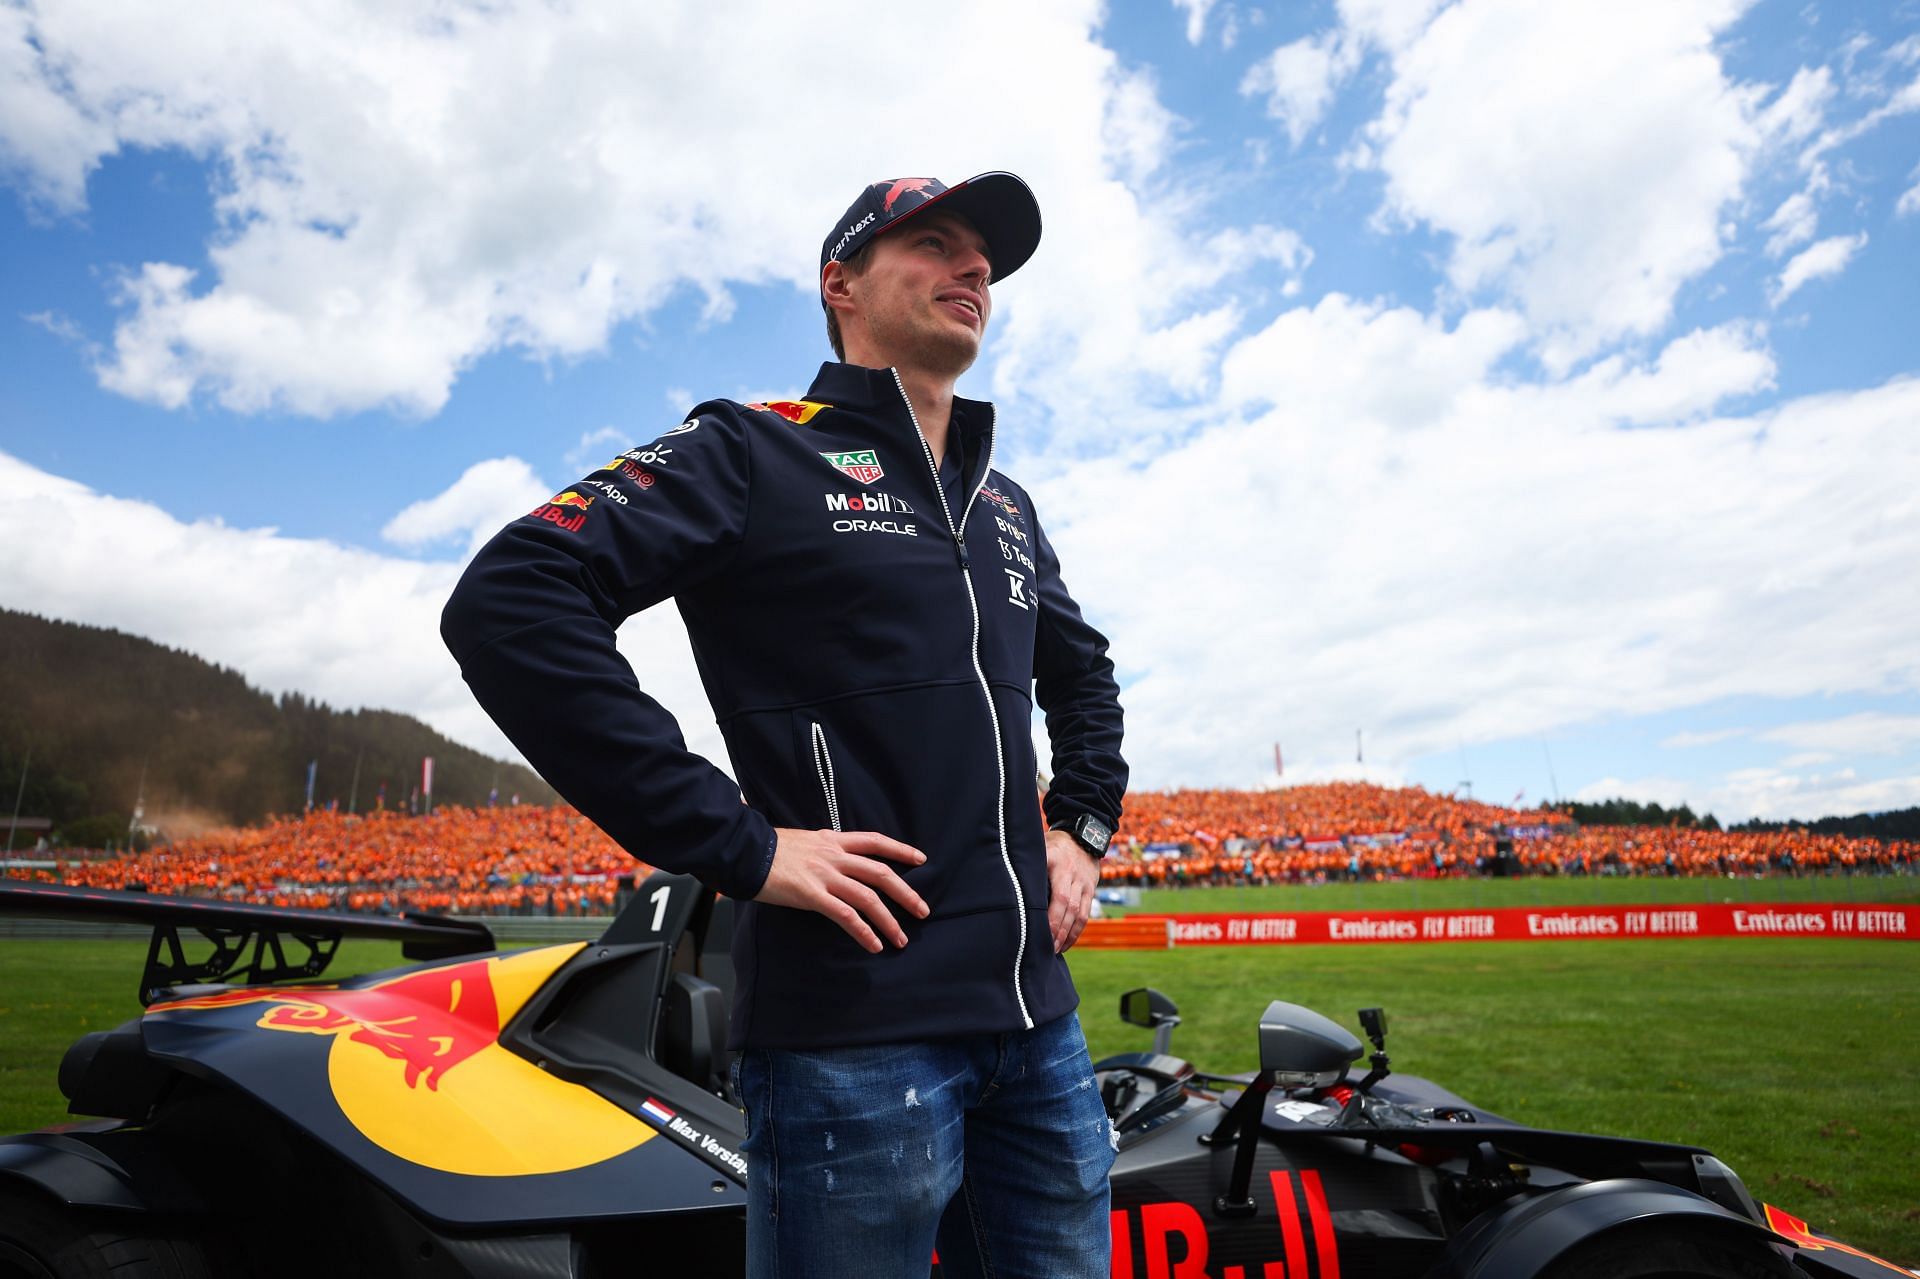 Max Verstappen has been more circumspect while going for overtakes this season